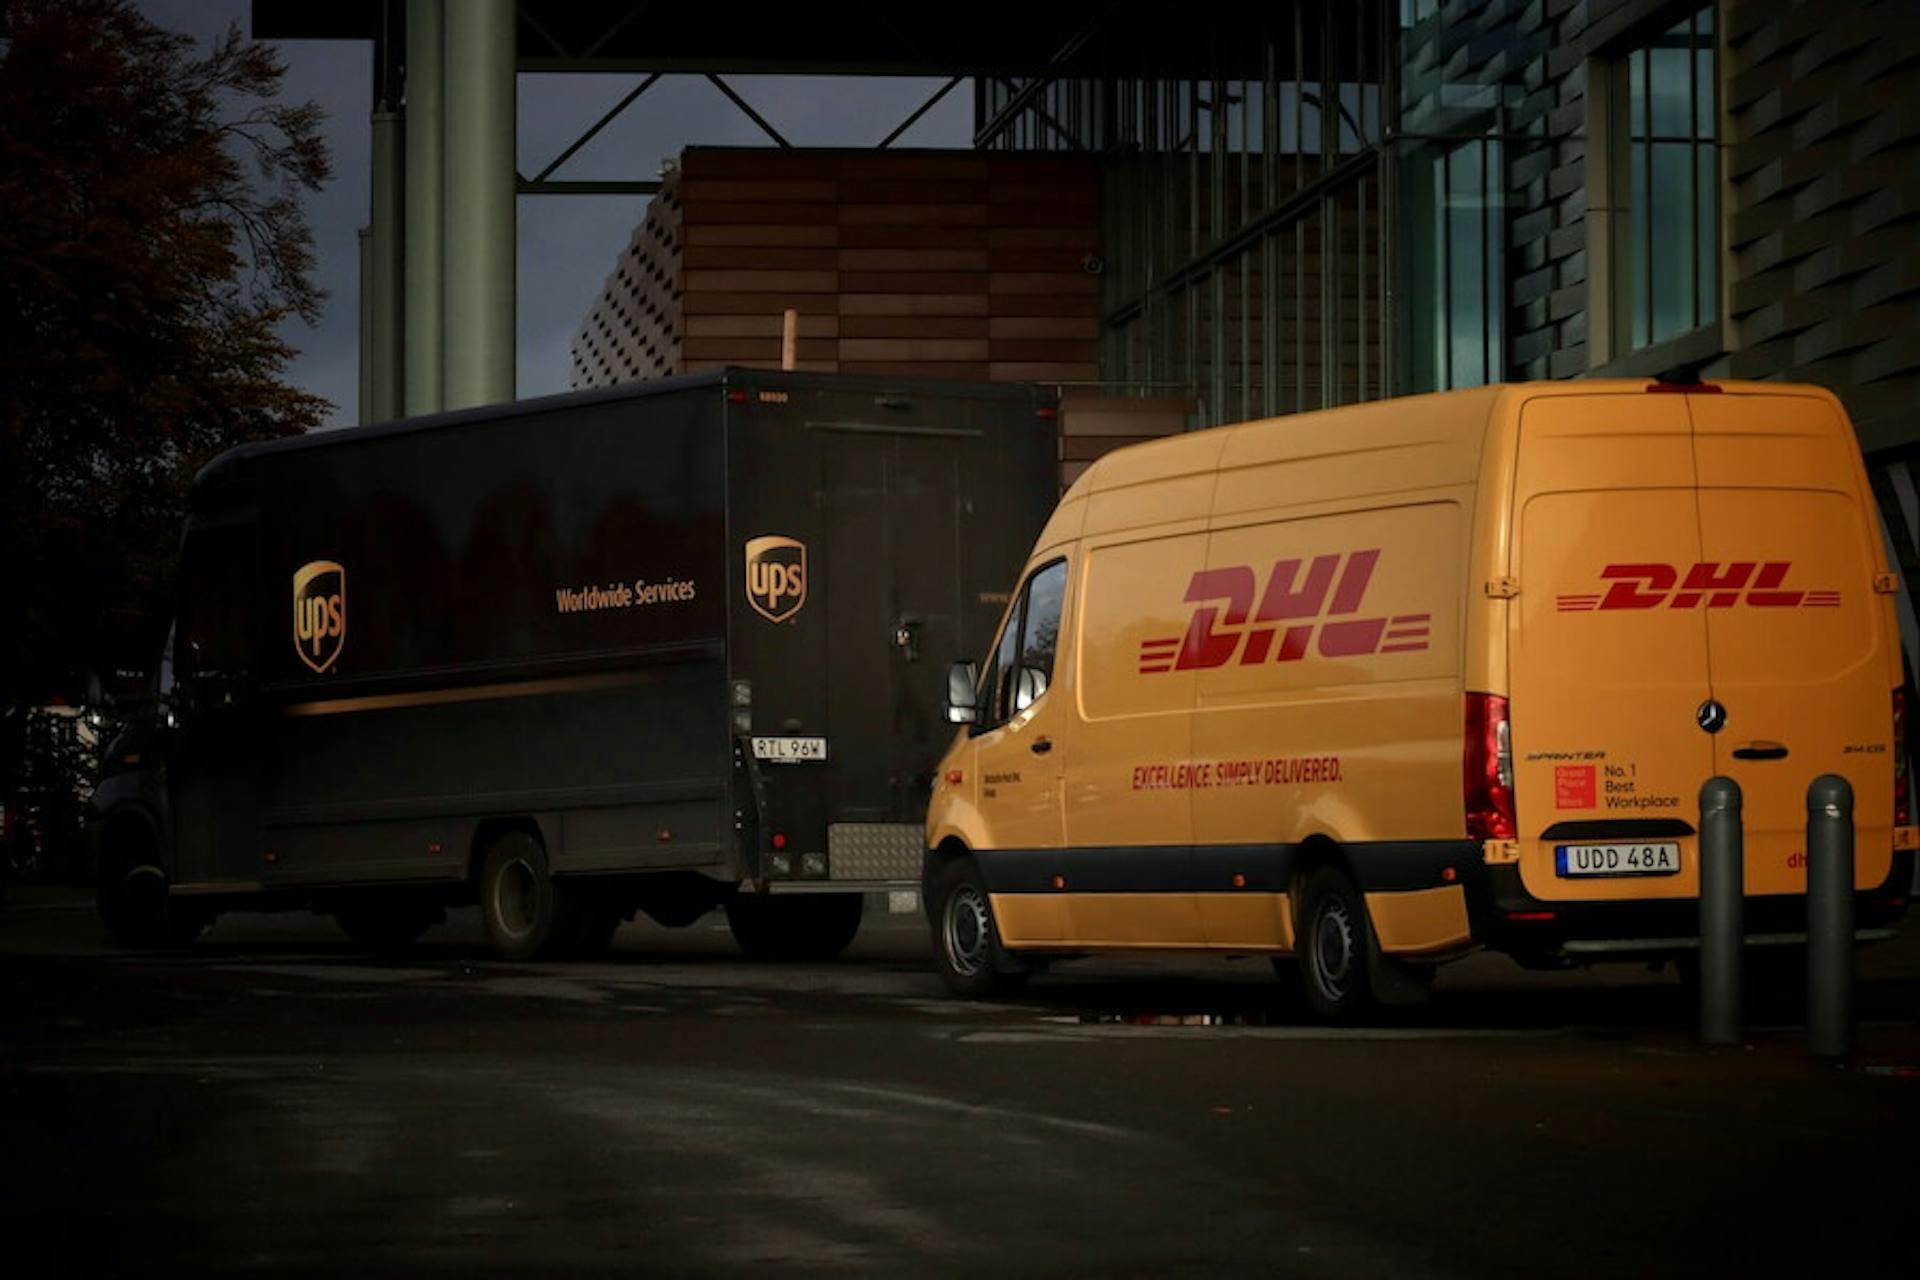 DHL Express and UPS trucks are on the road